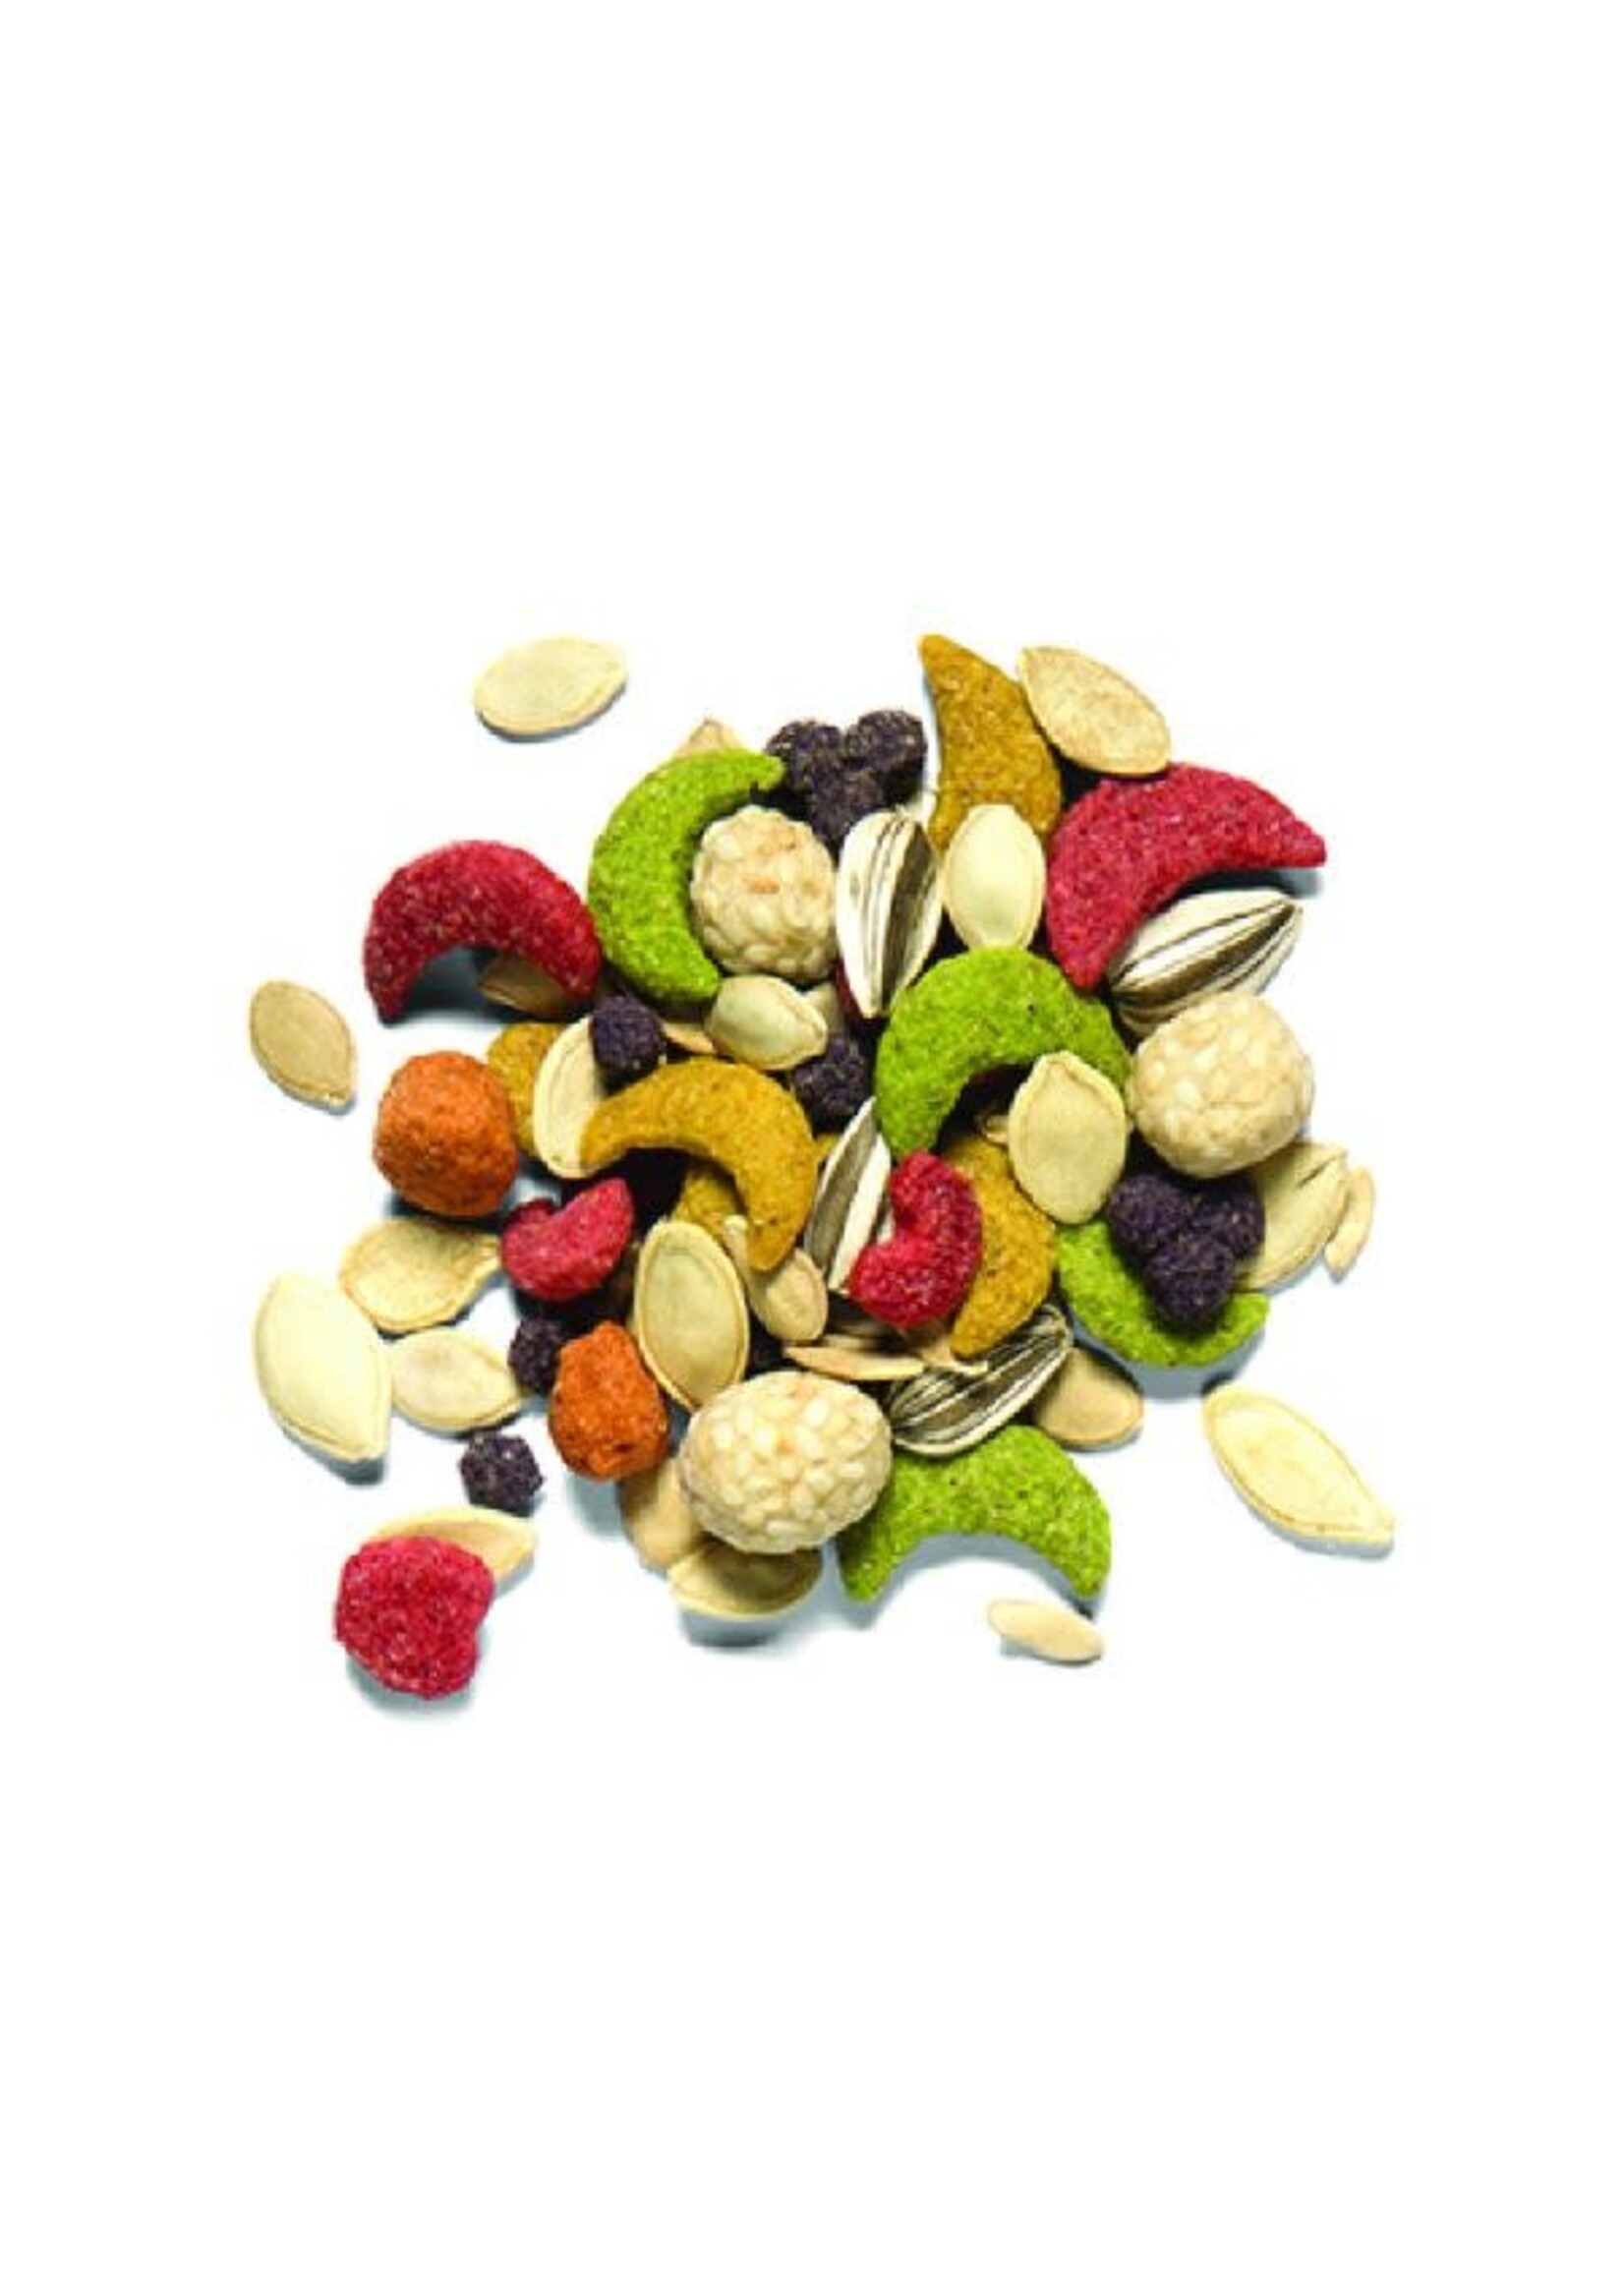 Zupreem ZuPreem "Sensible Seed" Food For Macaws, Parrots, Cockatoos & Other Large Birds 2lbs 48020